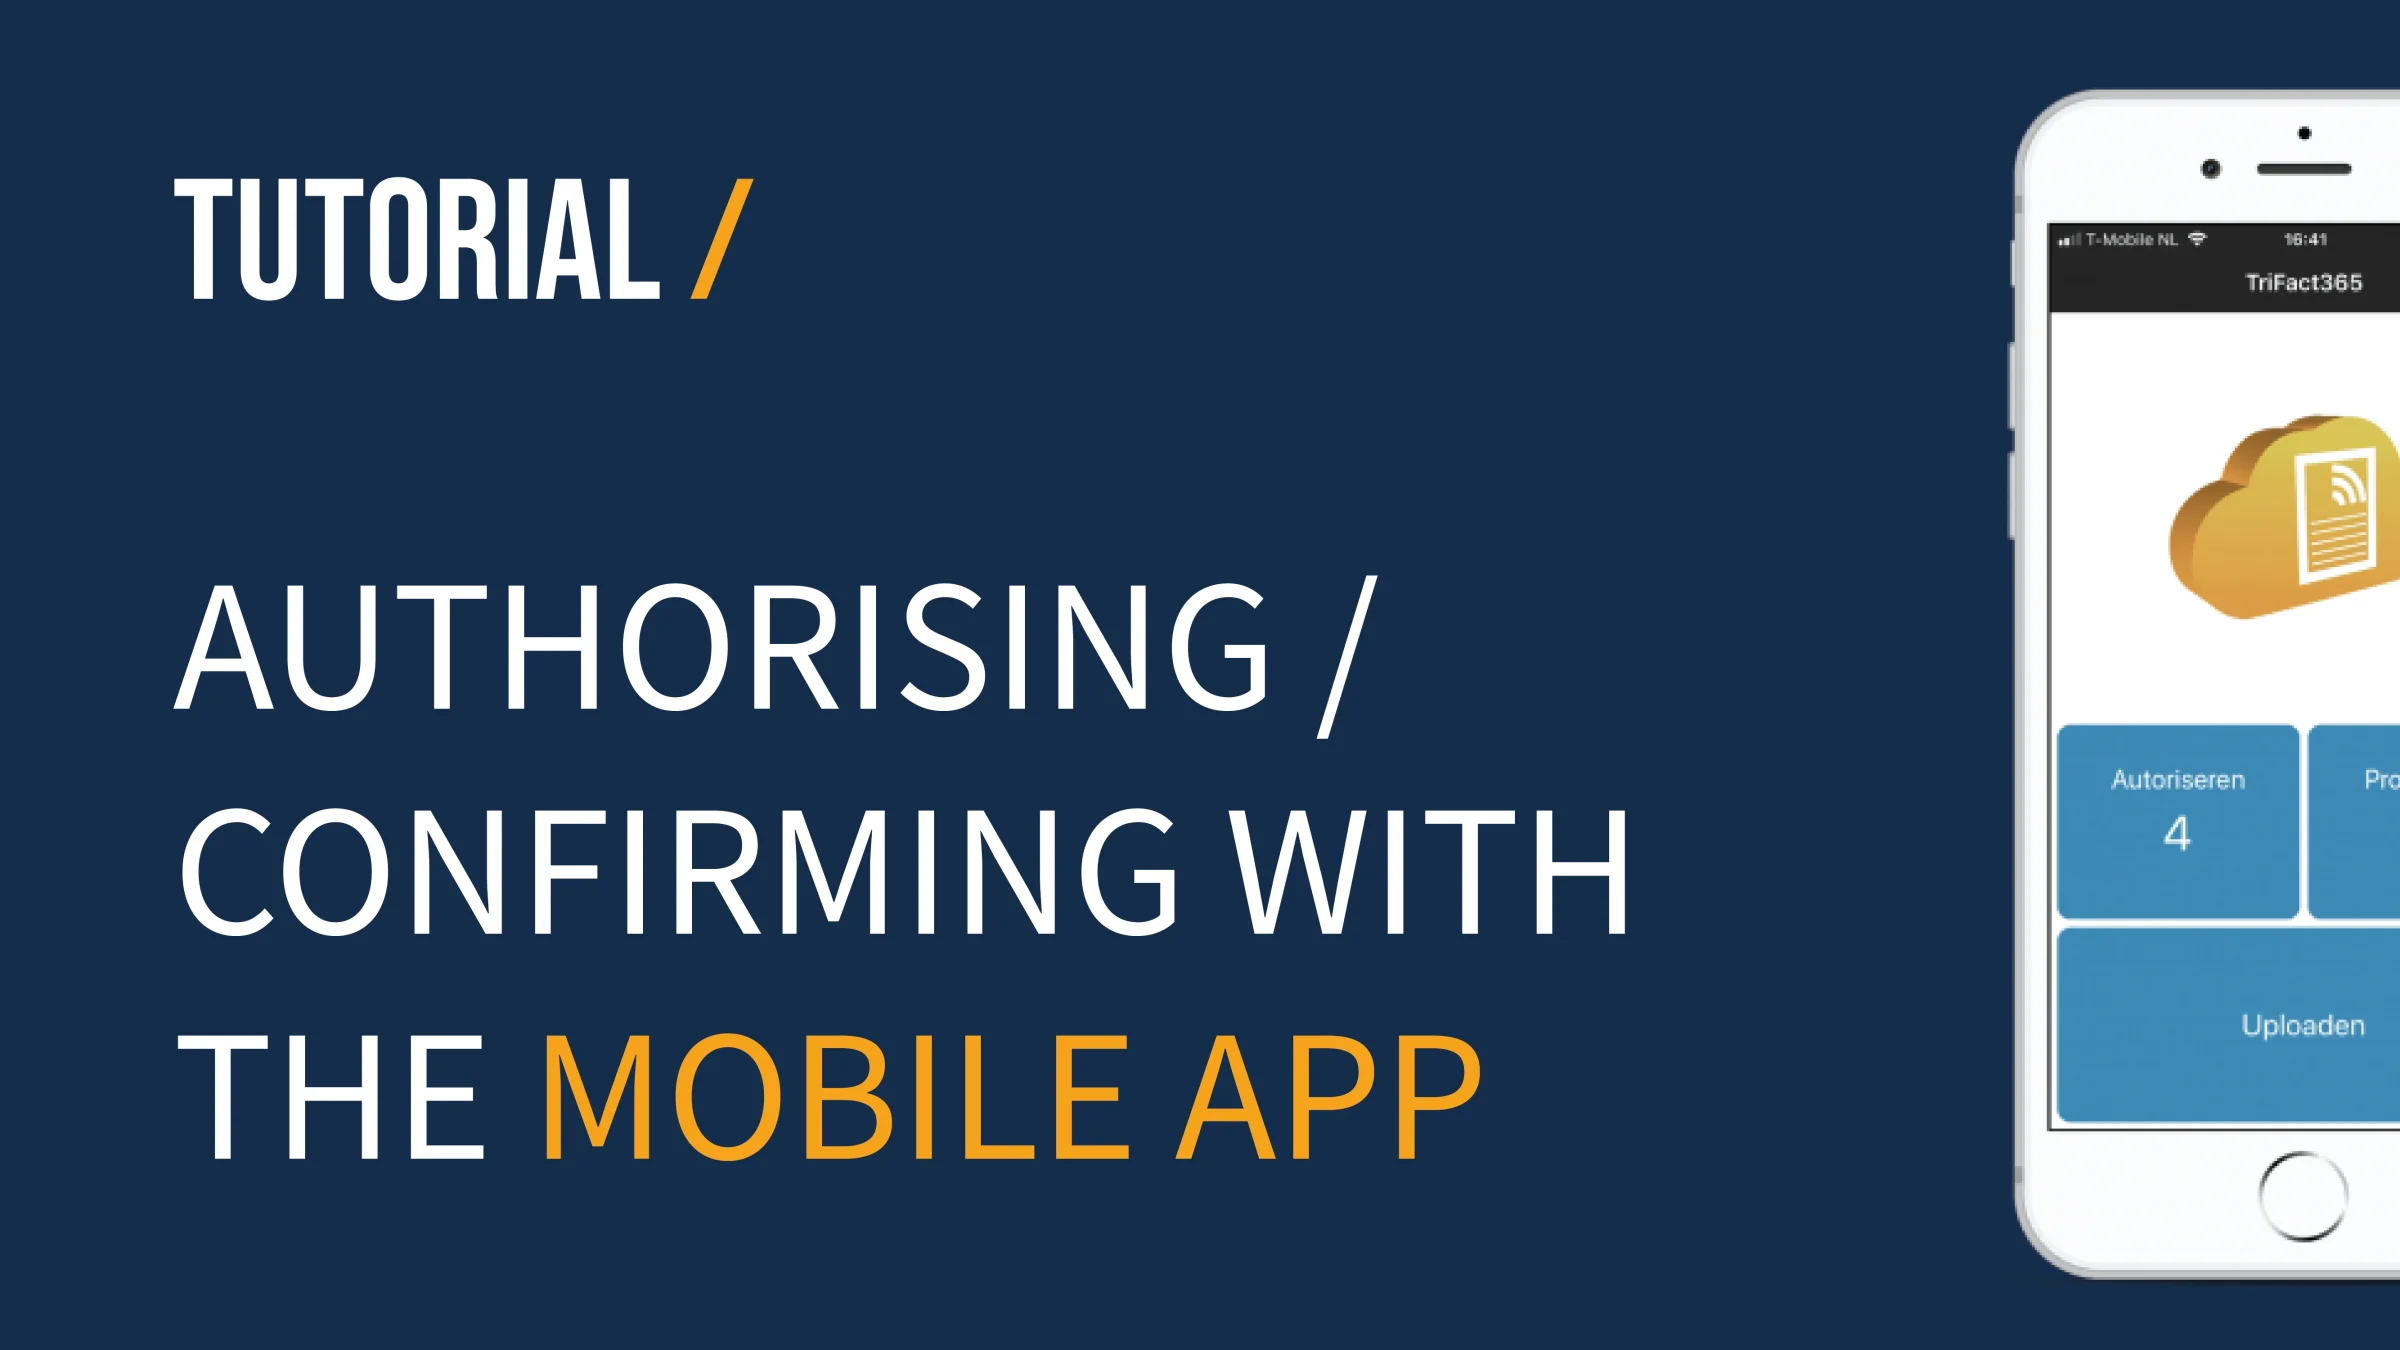 TriFact365 - Authorising or Confirming with the mobile app